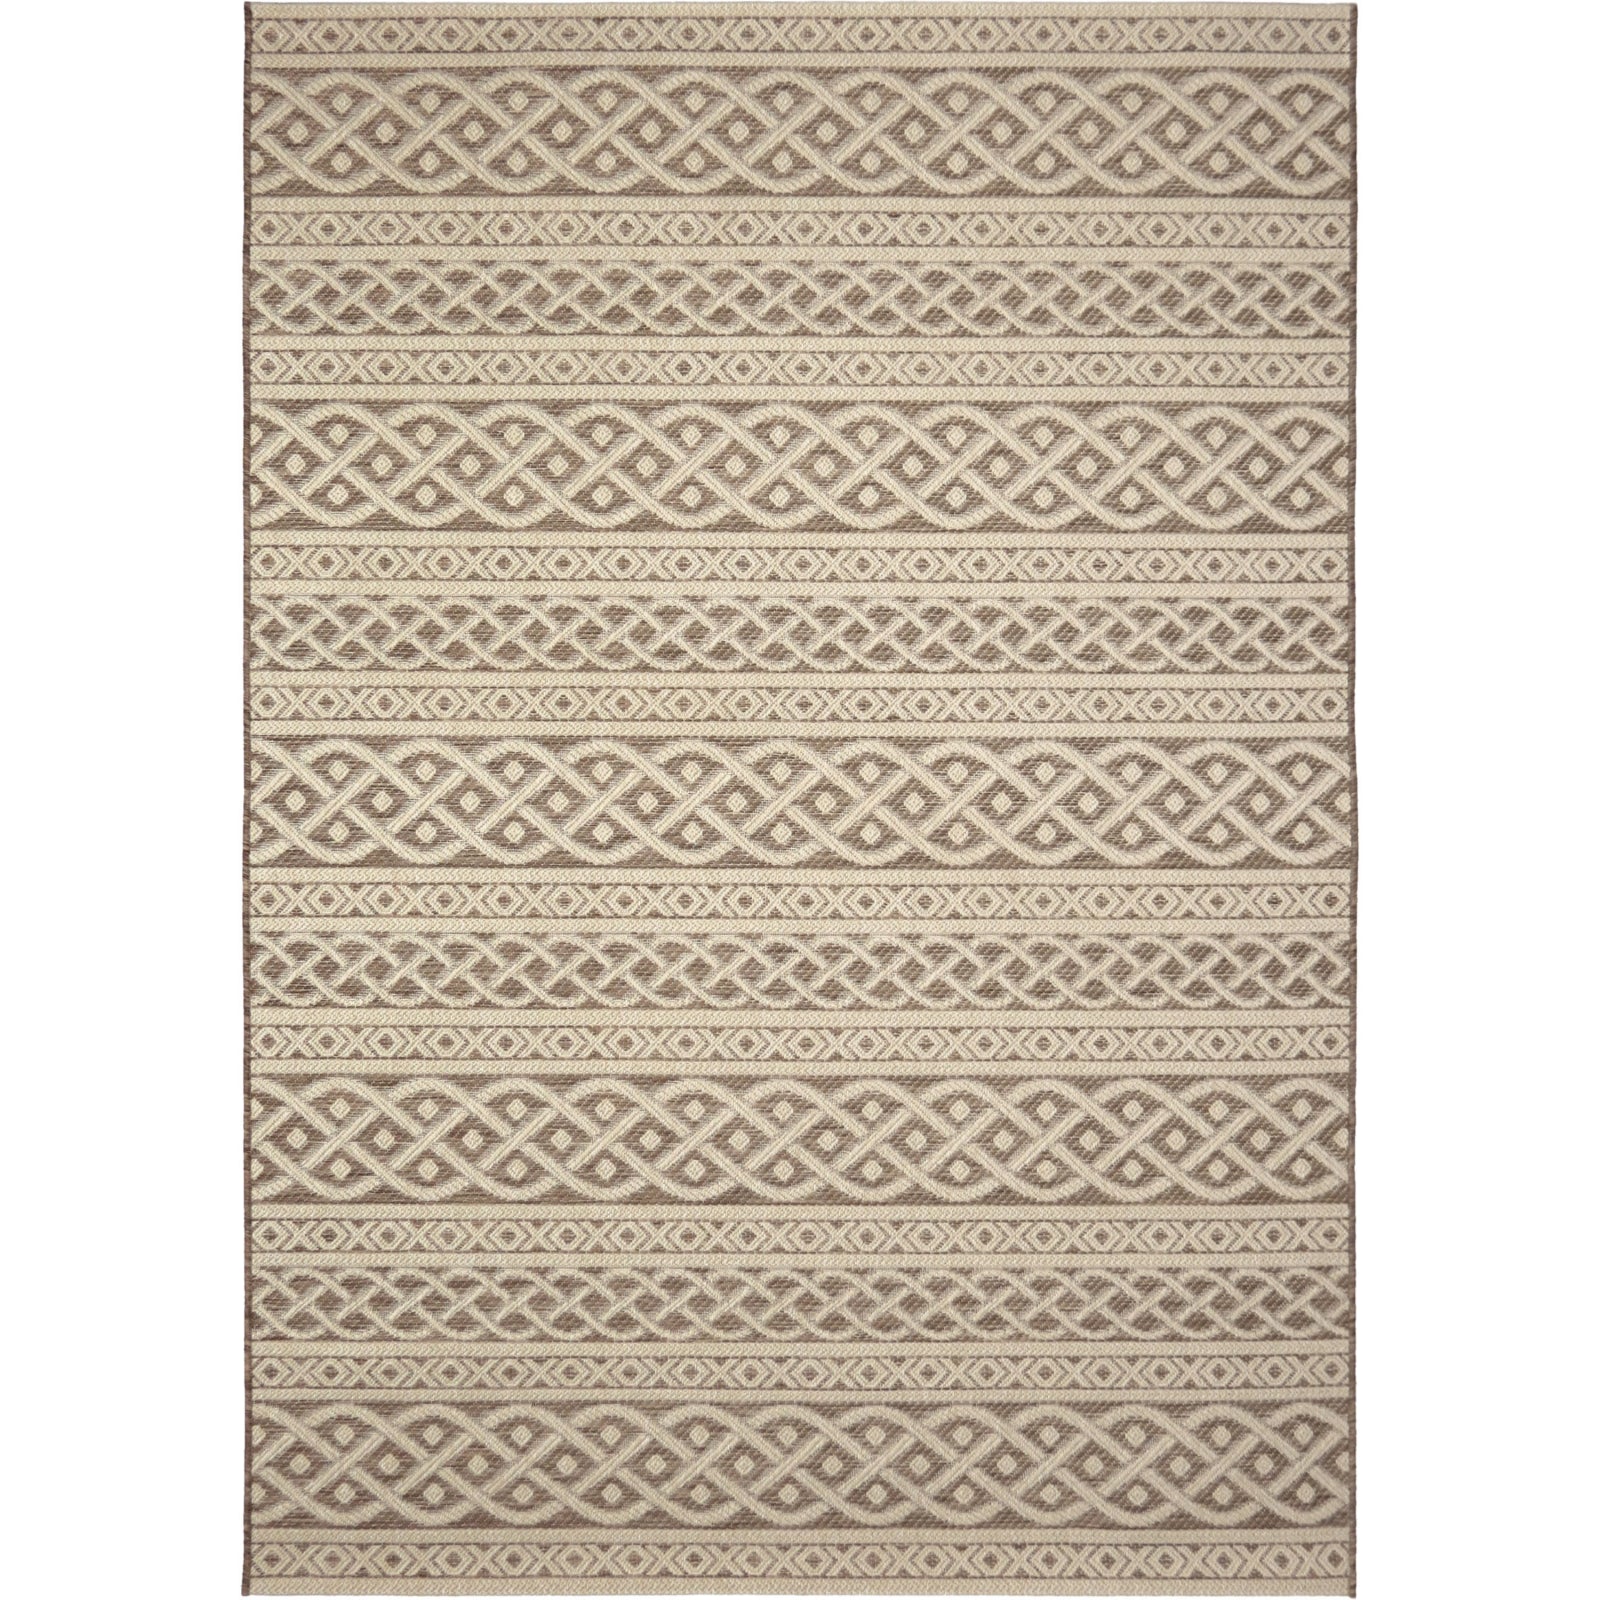 Orian Rugs Waterfront Tied Up Tan Area Rug main image